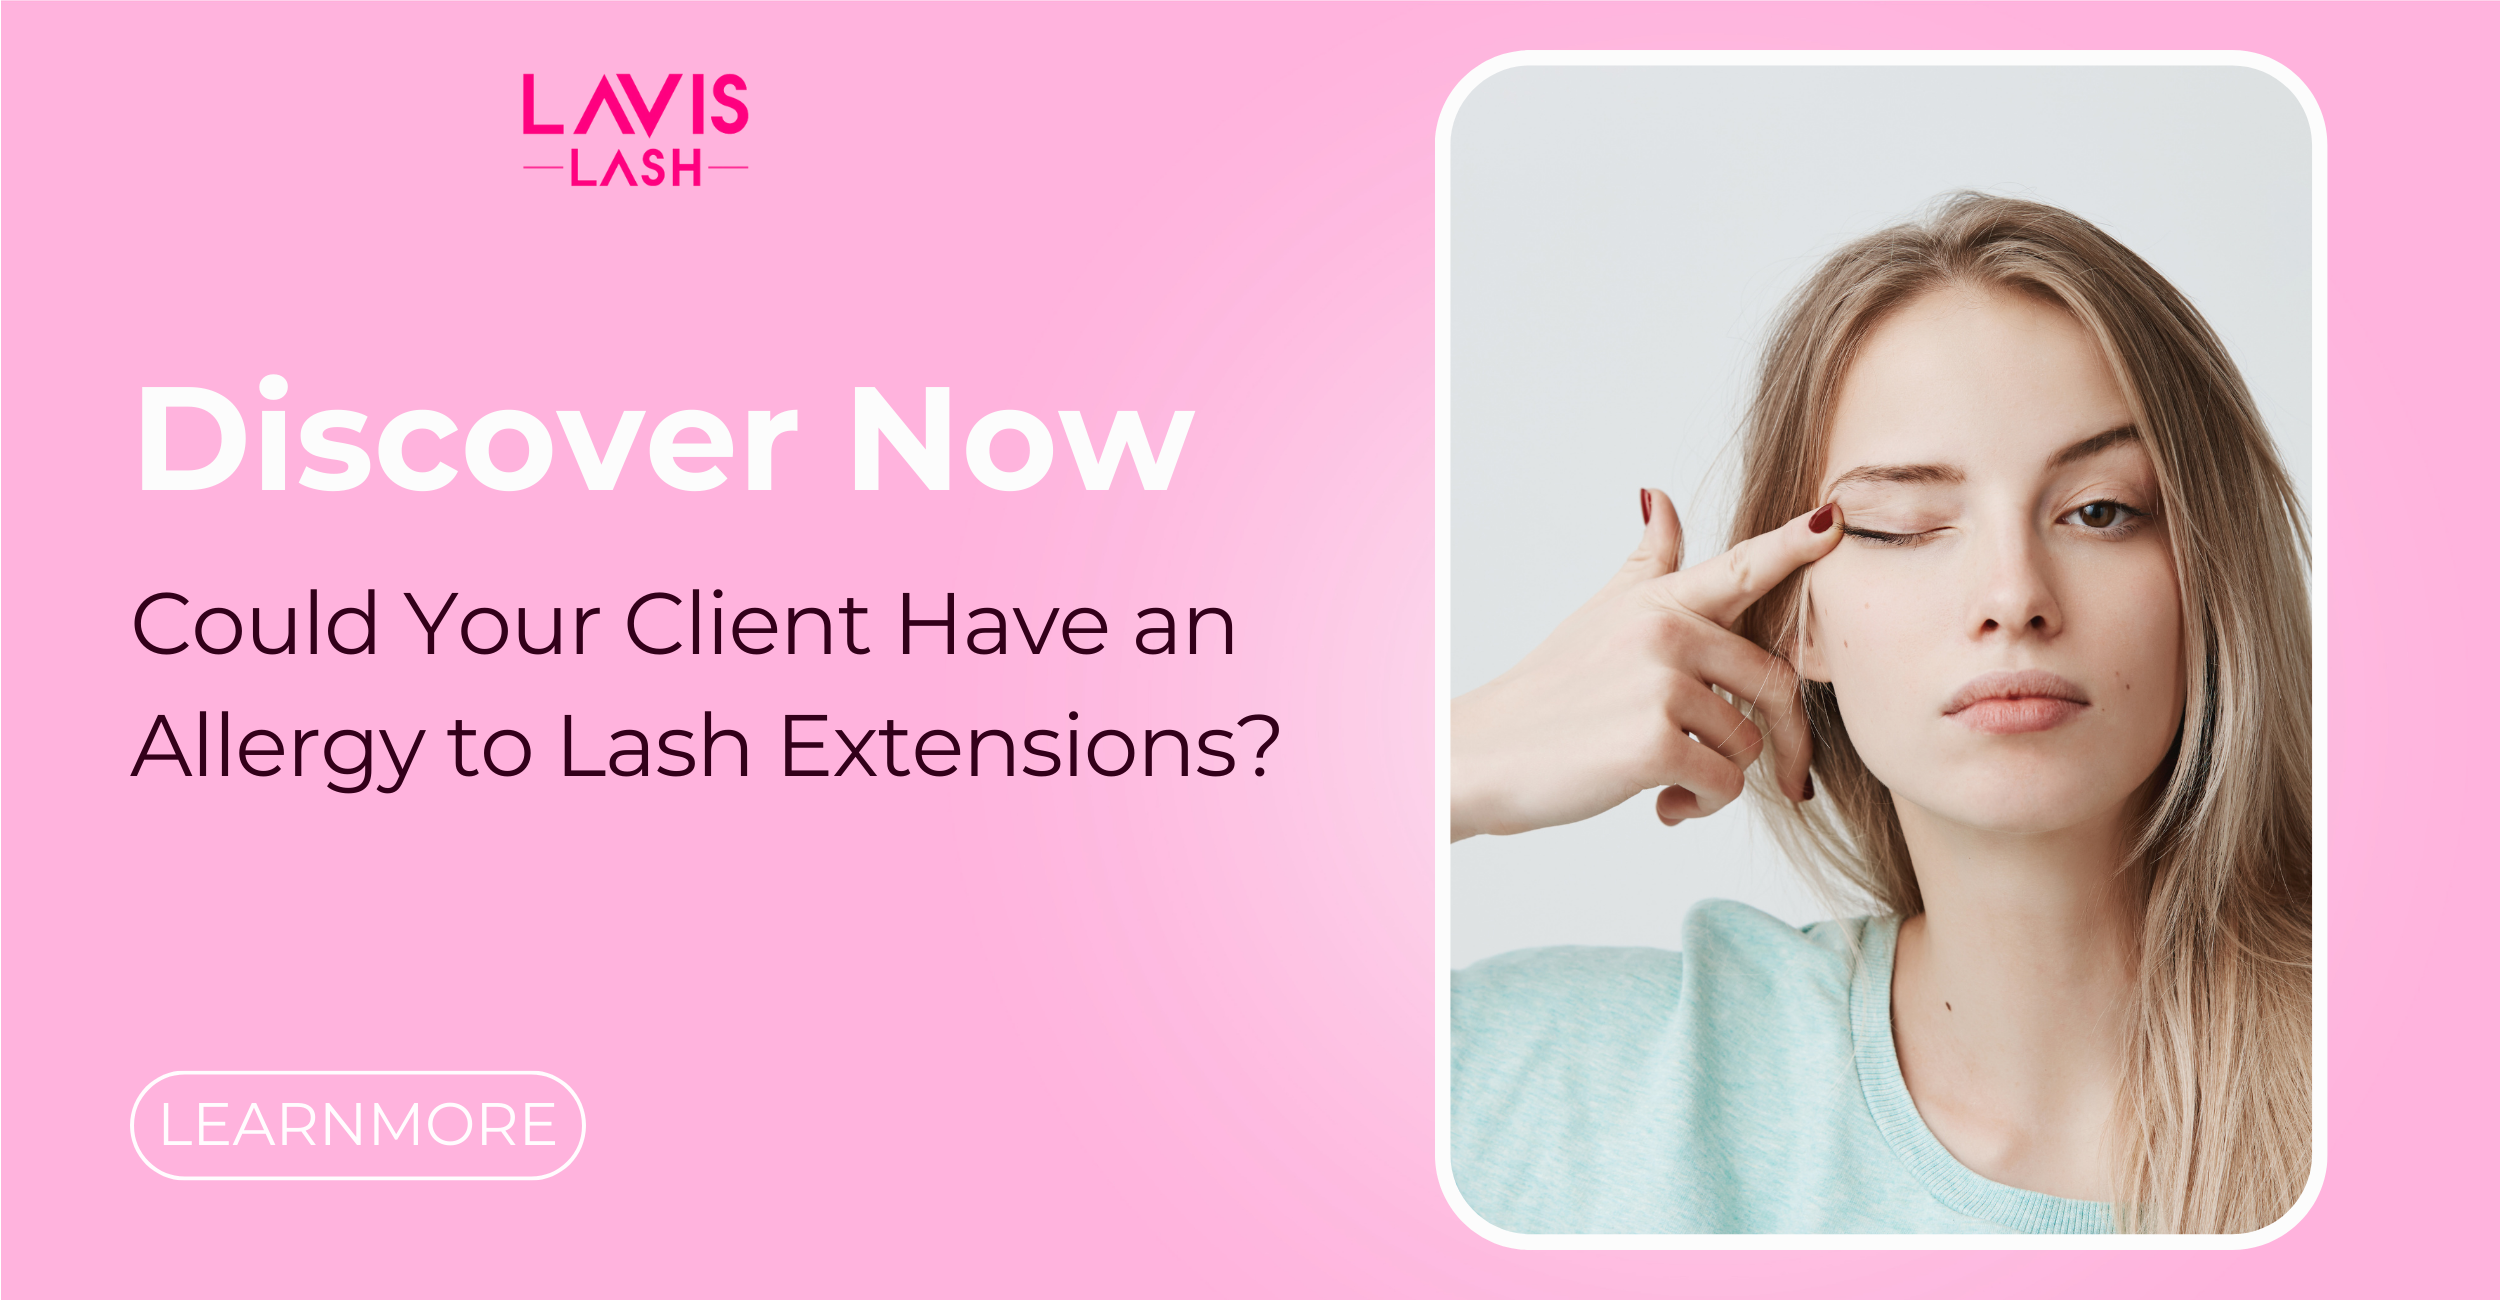 discover-now-could-your-customer-have-allergy-while-applying-eyelash-extensions-lavislash-lavislashus